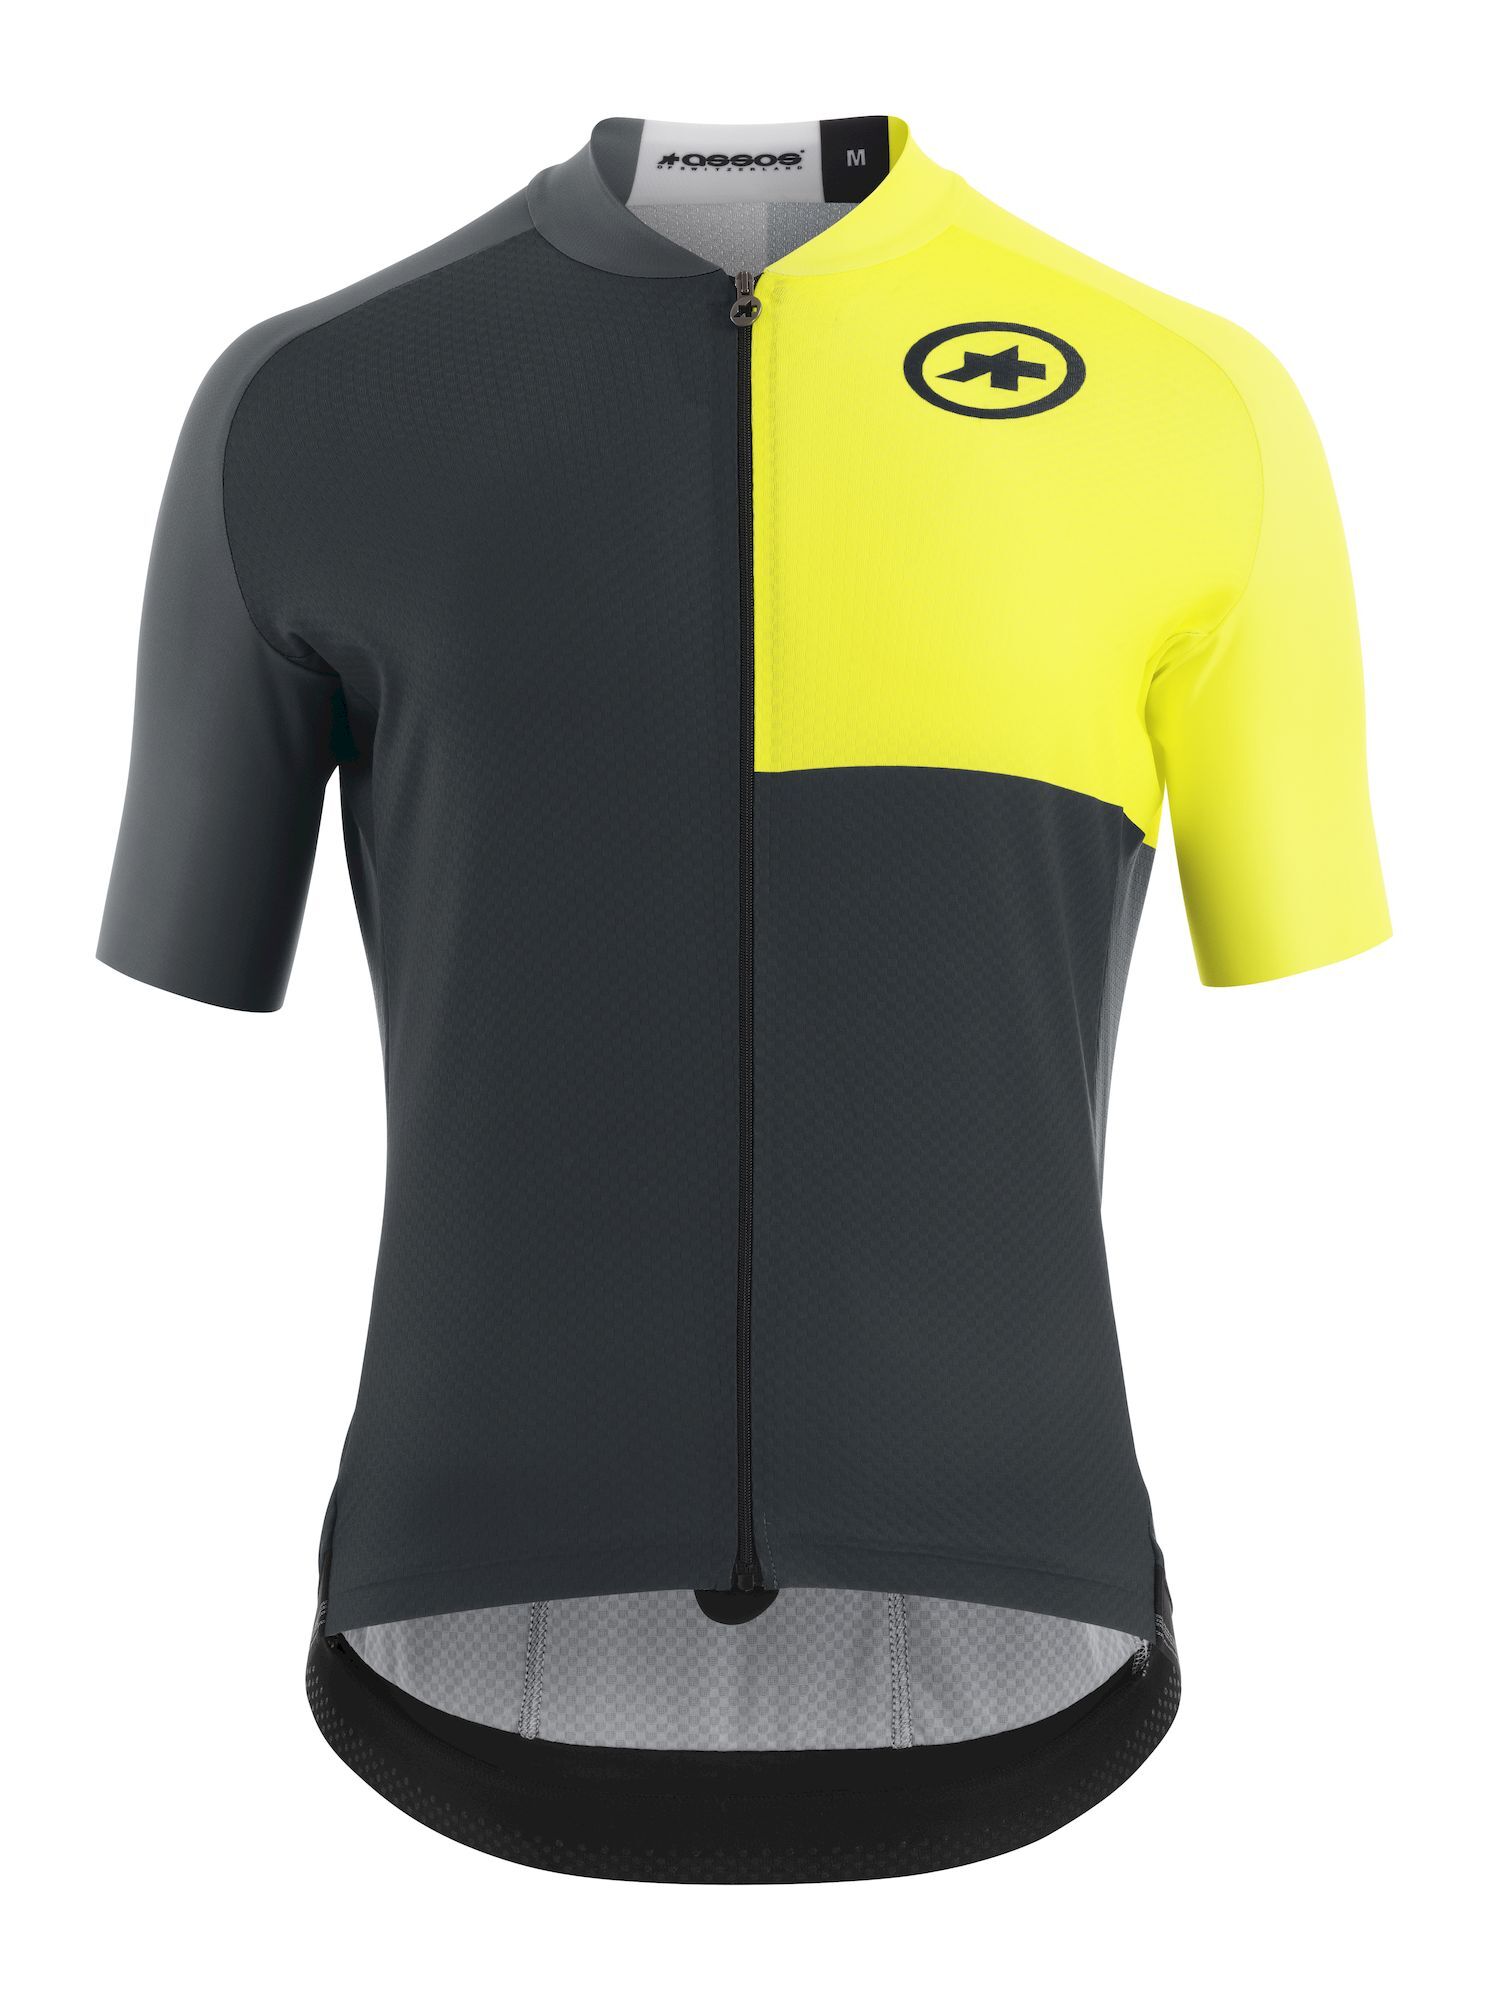 Assos Mille GT Jersey C2 EVO Stahlstern - Maglia ciclismo - Uomo | Hardloop